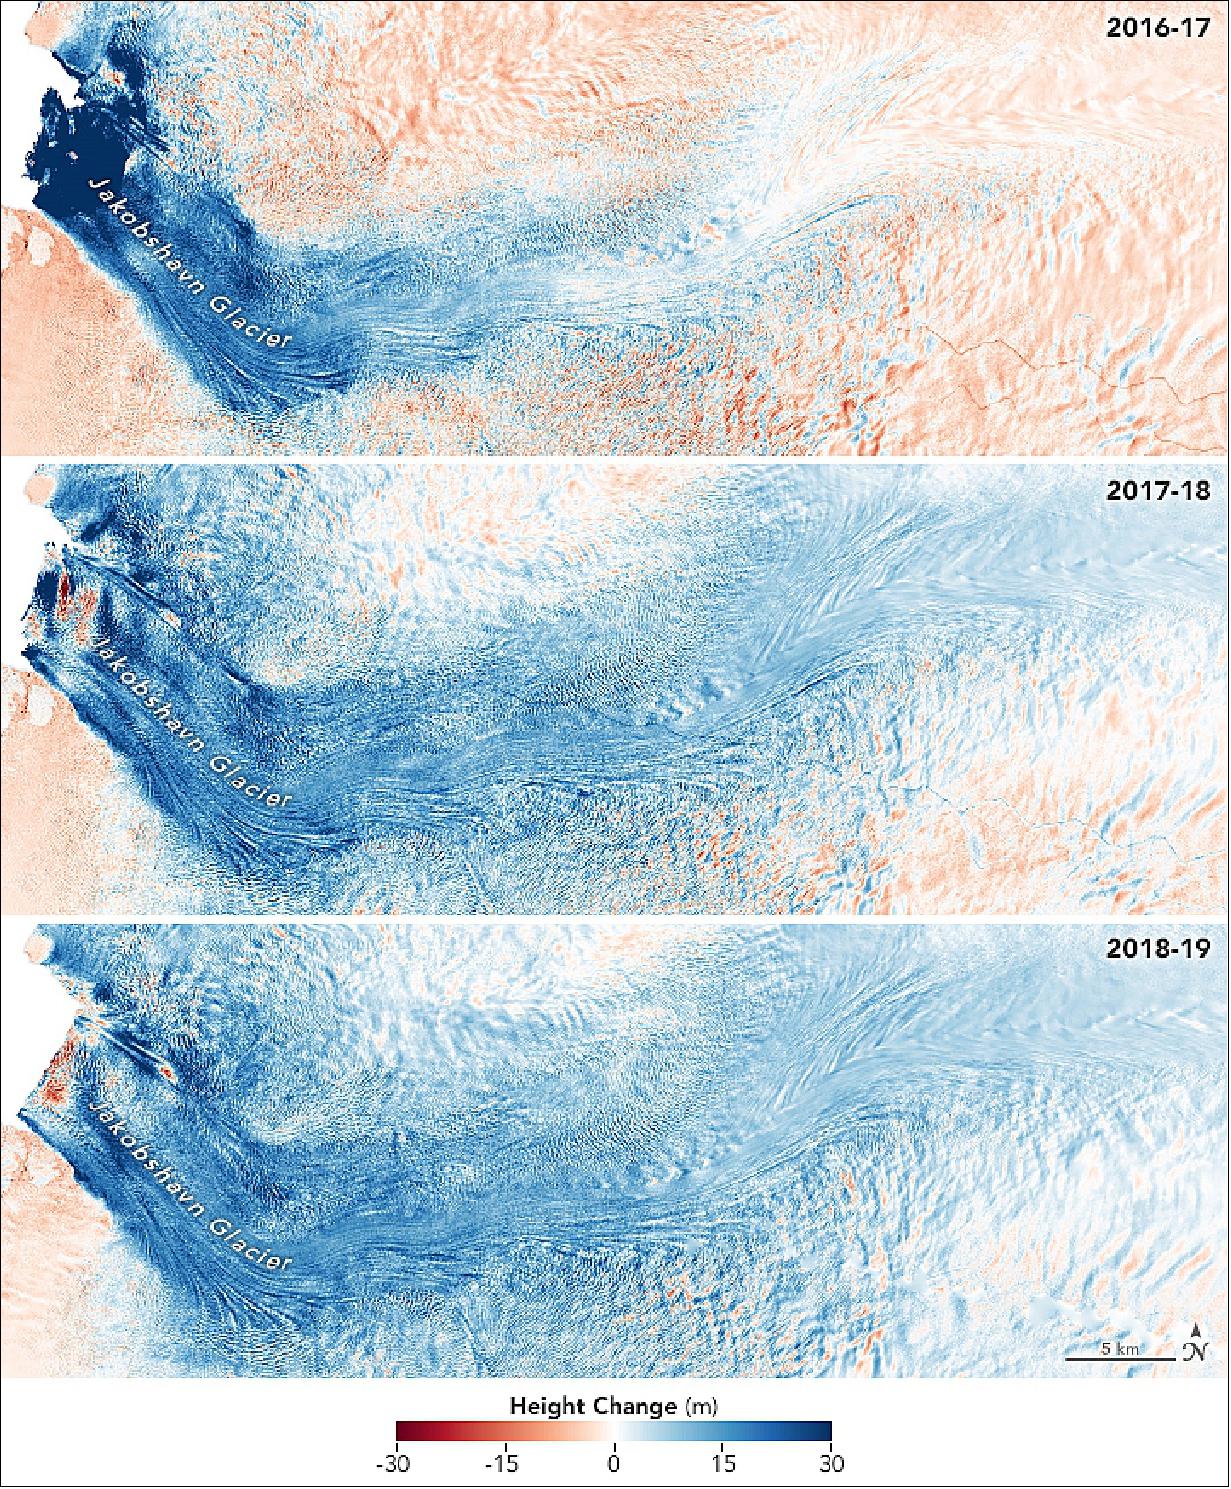 Figure 68: These maps show how the glacier’s height changed between March 2016 and 2017 (top); March 2017 and 2018 (middle); and March 2018 and 2019 (bottom). The elevation data come from a radar altimeter that has been flown on research airplanes each spring as part of OMG. Blue areas represent where the glacier’s height has increased, in some areas by as much as 30 m/year (image credit: (image credit: NASA Earth Observatory, image by Joshua Stevens, using Landsat data from the U.S. Geological Survey, and data courtesy of Josh Willis/NASA JPL and the Oceans Melting Greenland (OMG) Program. Story by Kathryn Hansen)